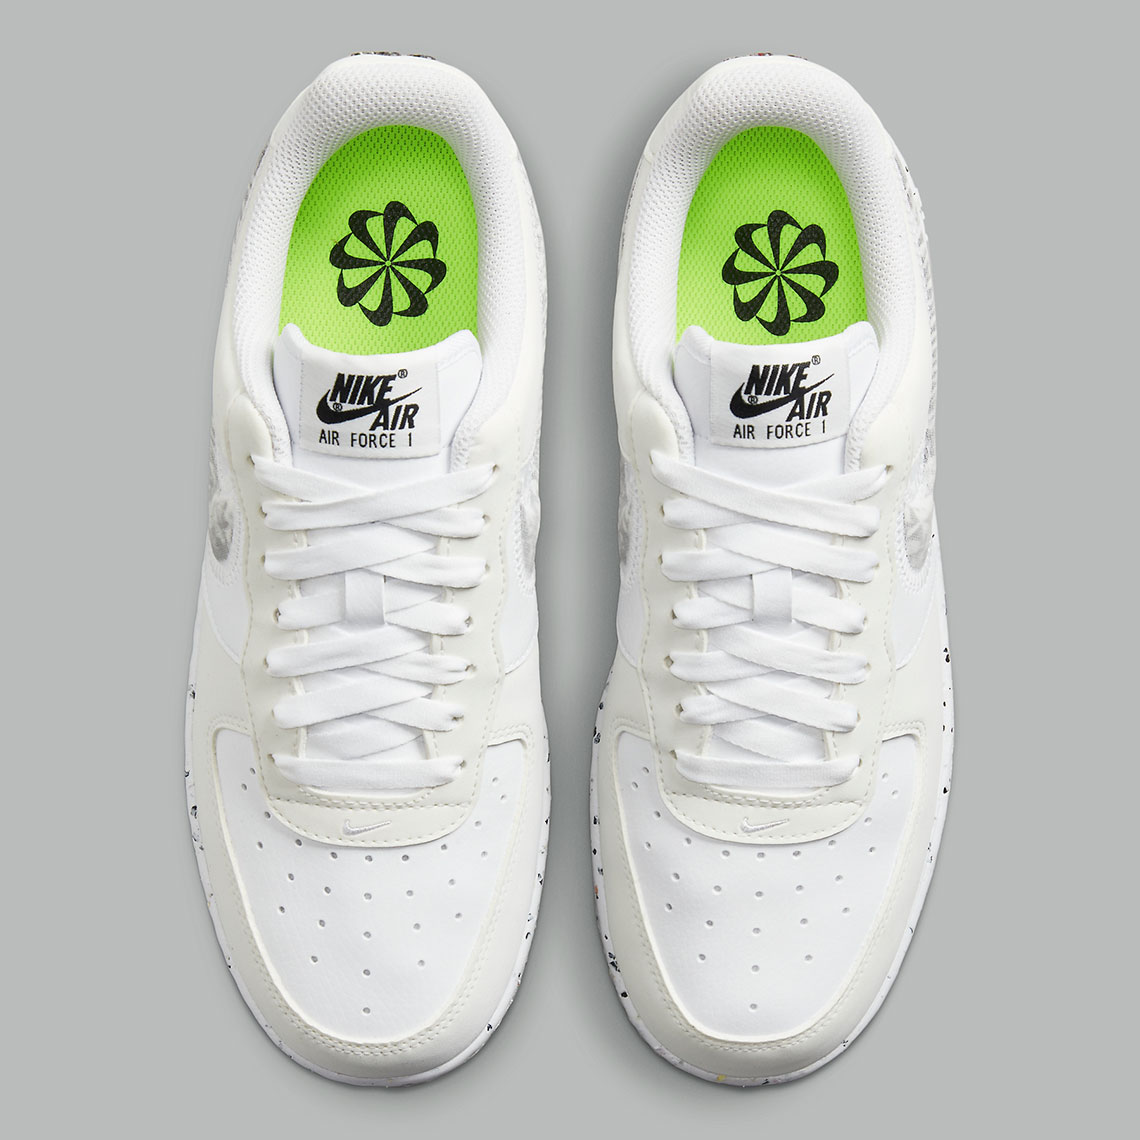 Nike Air Force 1 Low Crater White Sail DH0927-101 | SneakerNews.com